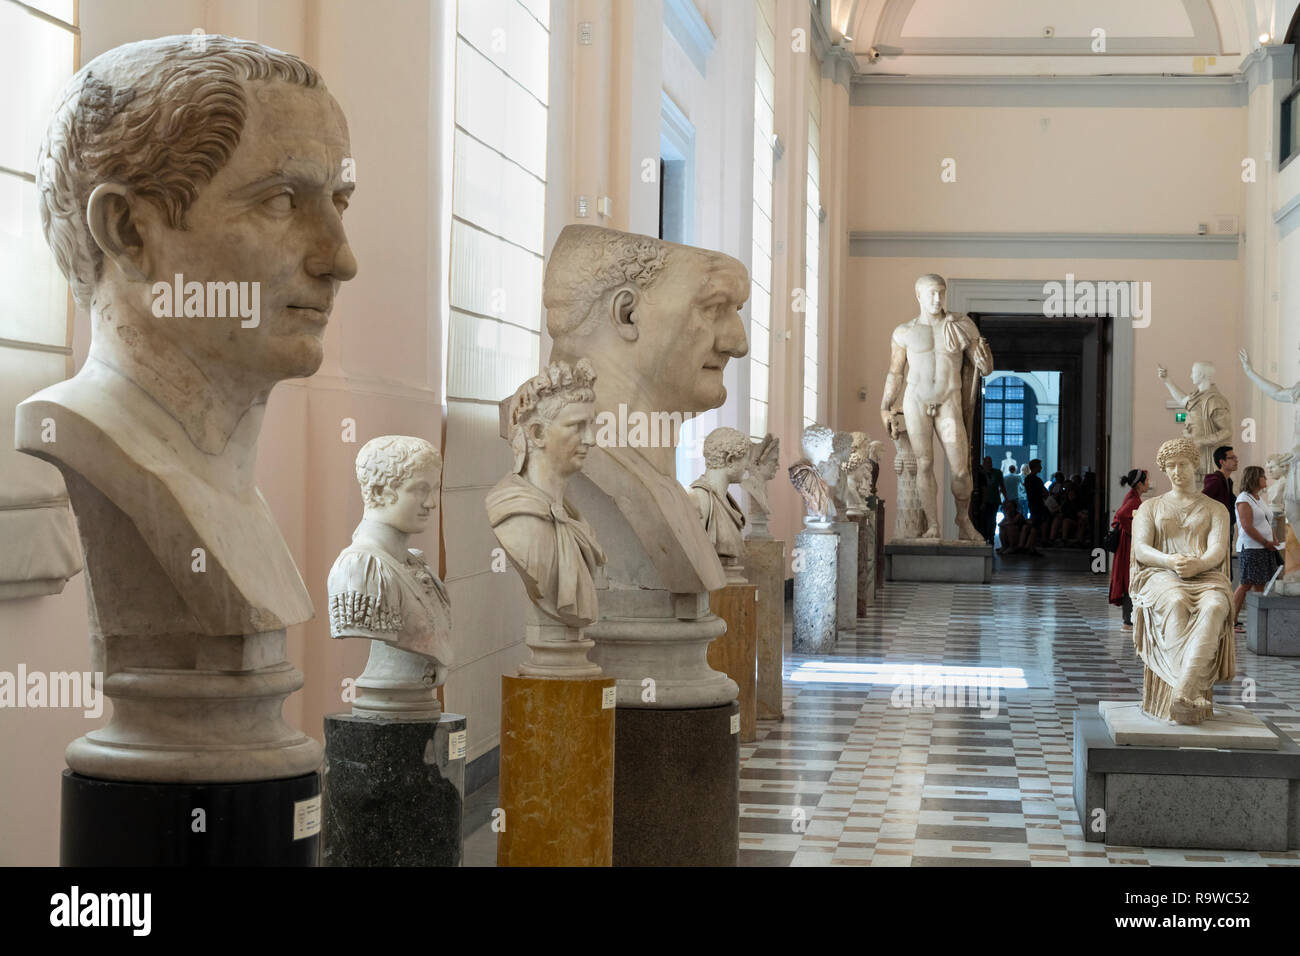 Roman period sculptures on display In the National Archaeological Museum at Naples, Italy. Stock Photo